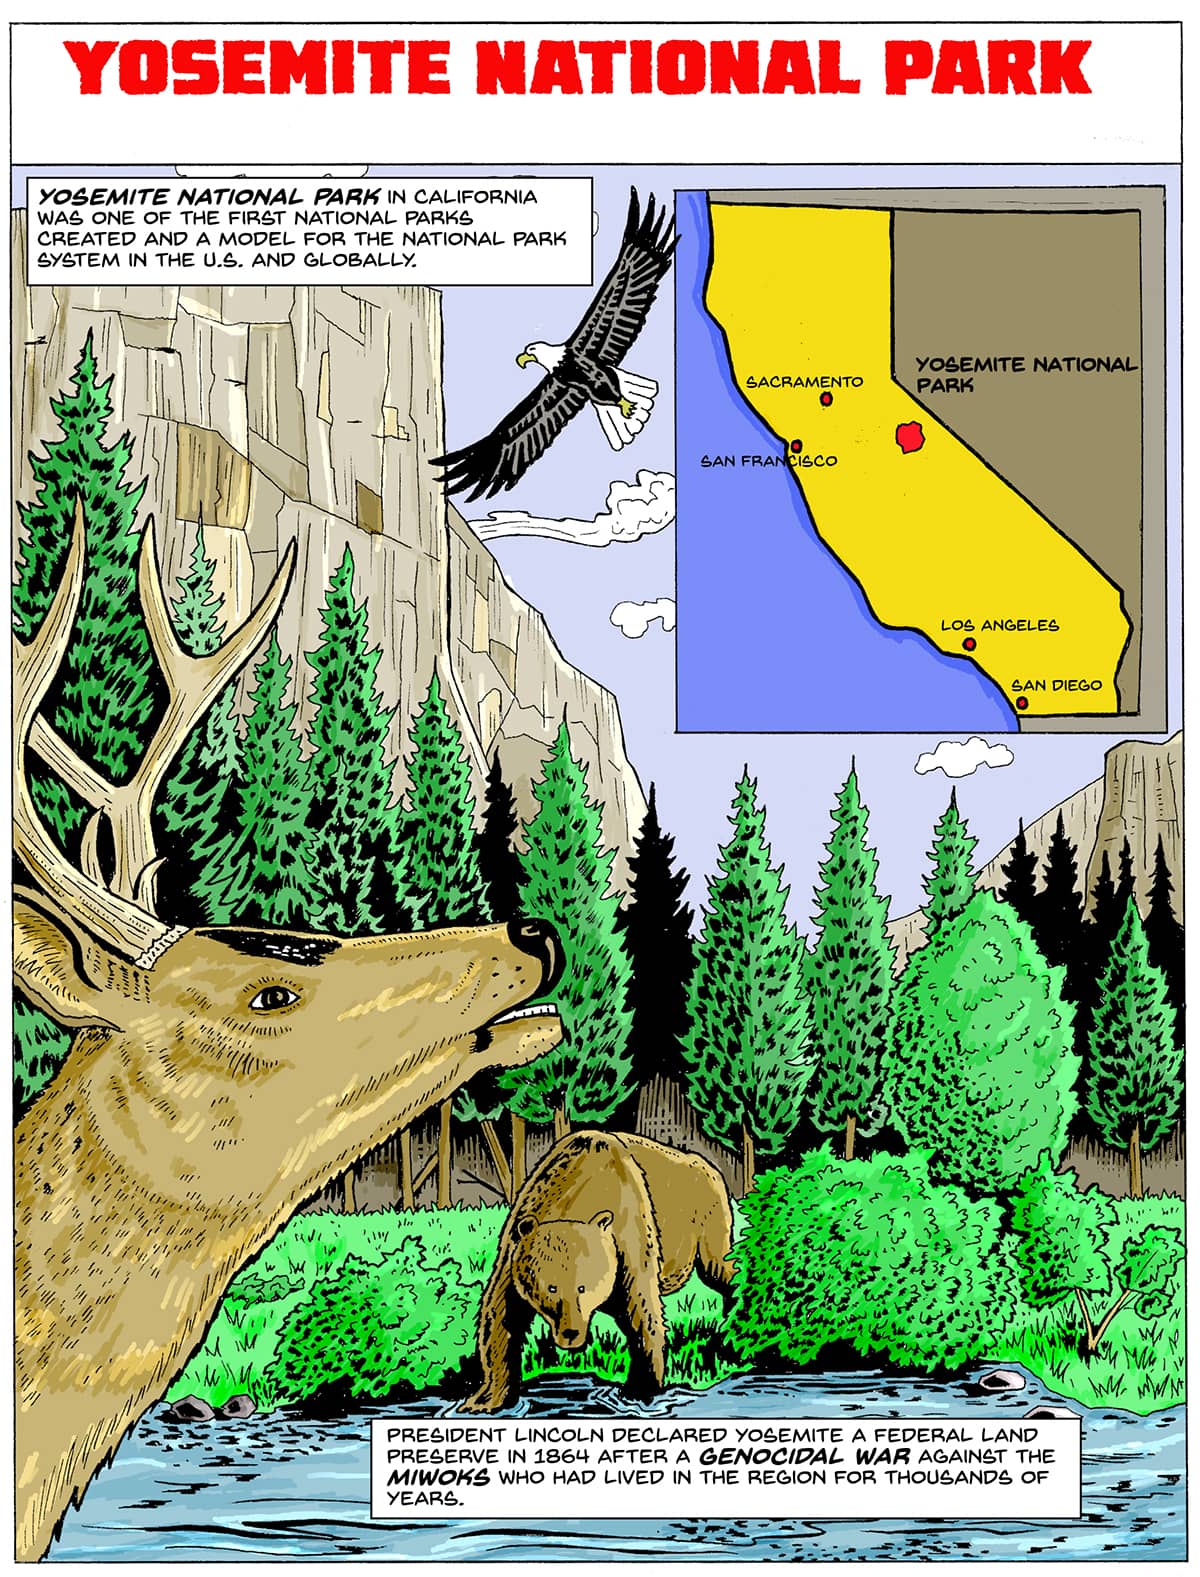 A panel titled "Yosemite National Park" A deer, bear, and eagle stand in a wooded valley. In the corner of the image, a comic panel shows a map of the state of California with Yosemite marked in the eastern part of the middle of the state. Text: Yosemite National Park in California was one of the first national parks created and a model for the national park system in the U.S. and globally. President Lincoln declared Yosemite a federal land preserve in 1864 after a genocidal war against the Miwoks who had lived in the region for thousands of years.